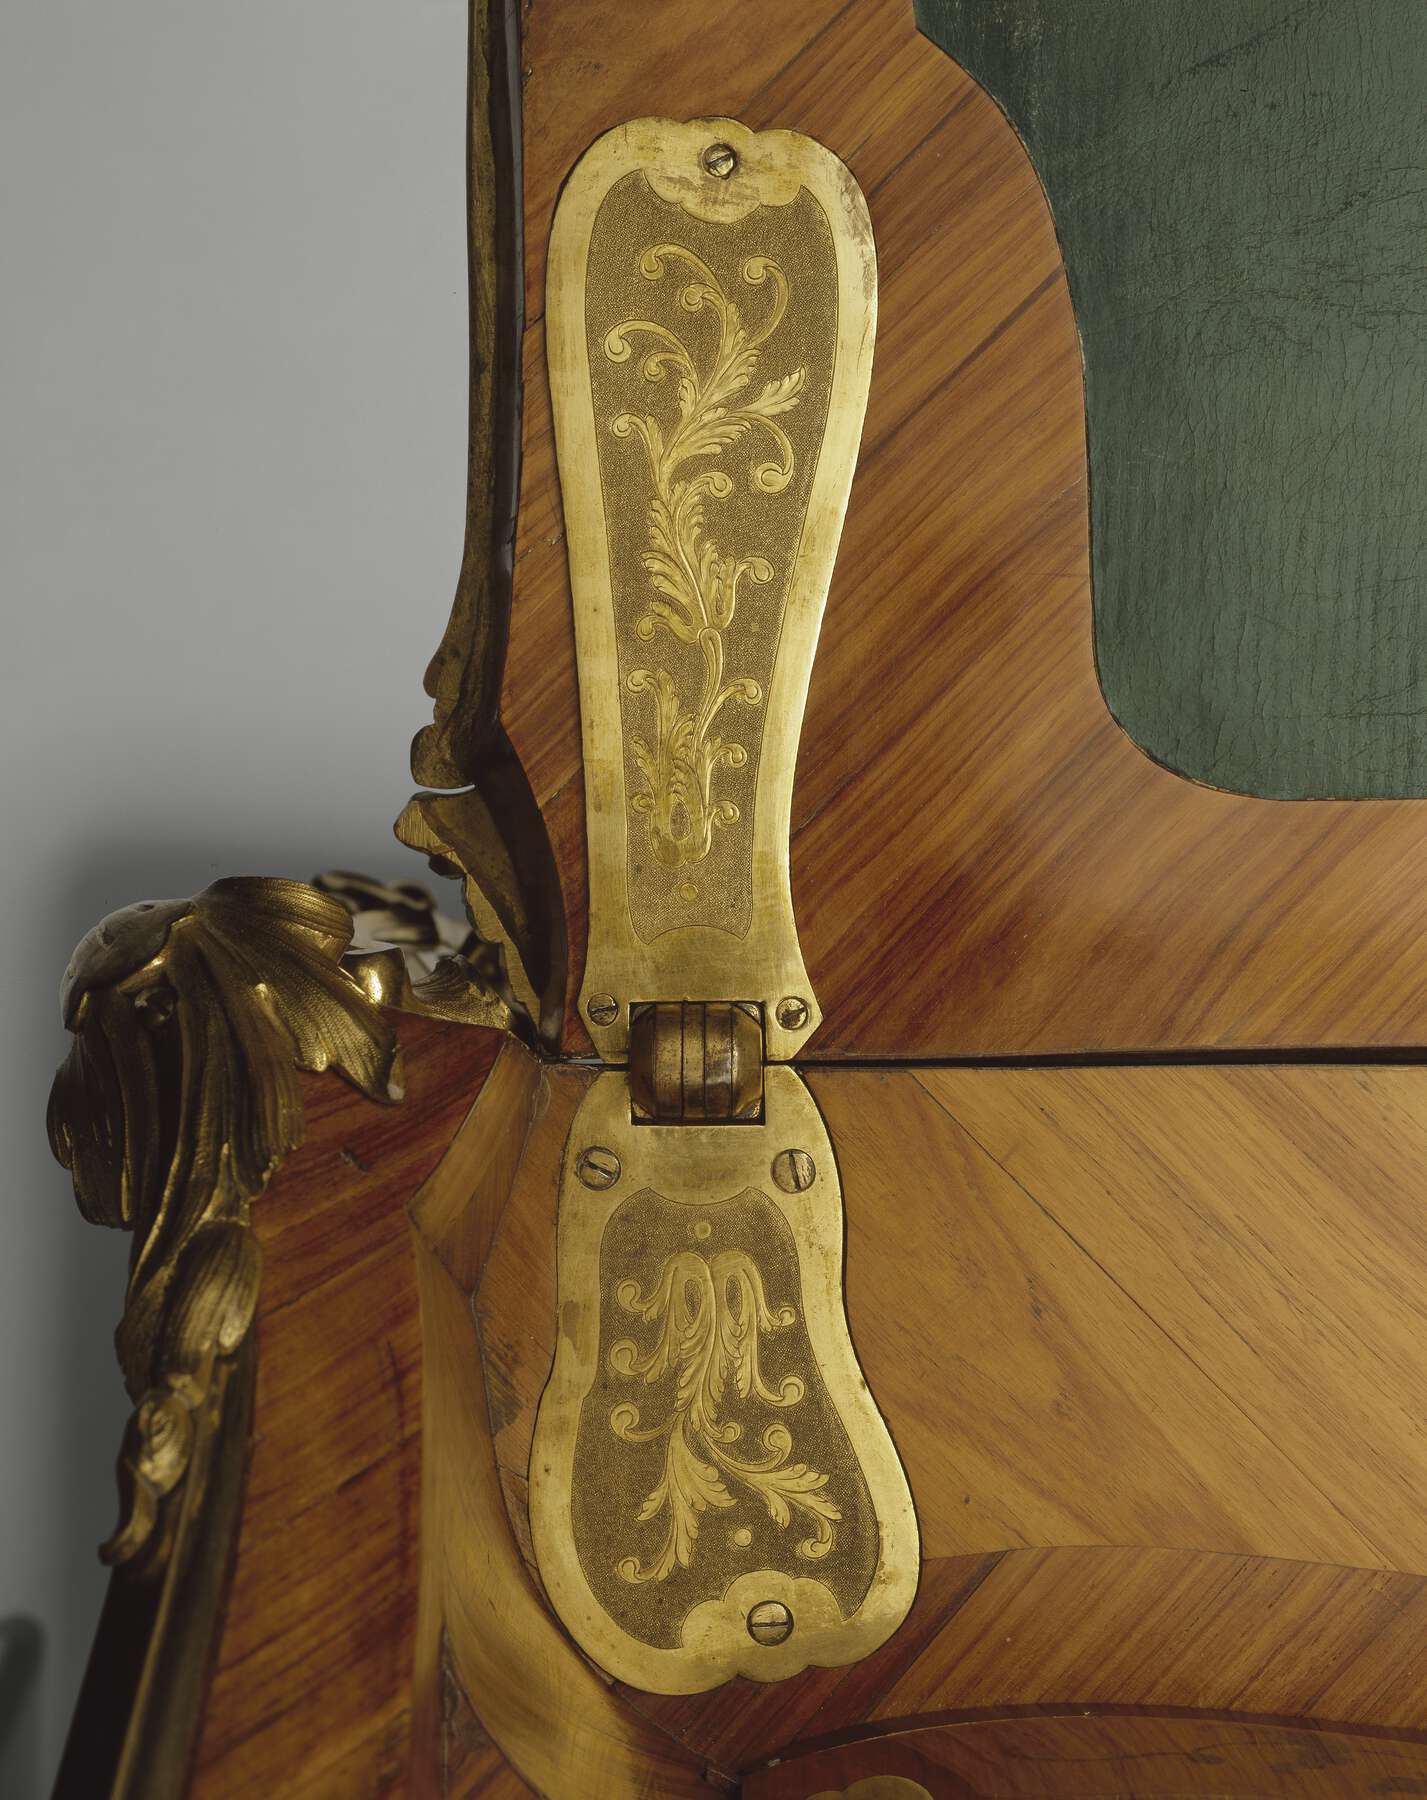 gilt bronze plates decorated with floral scrolls cover the desk’s inner hinges